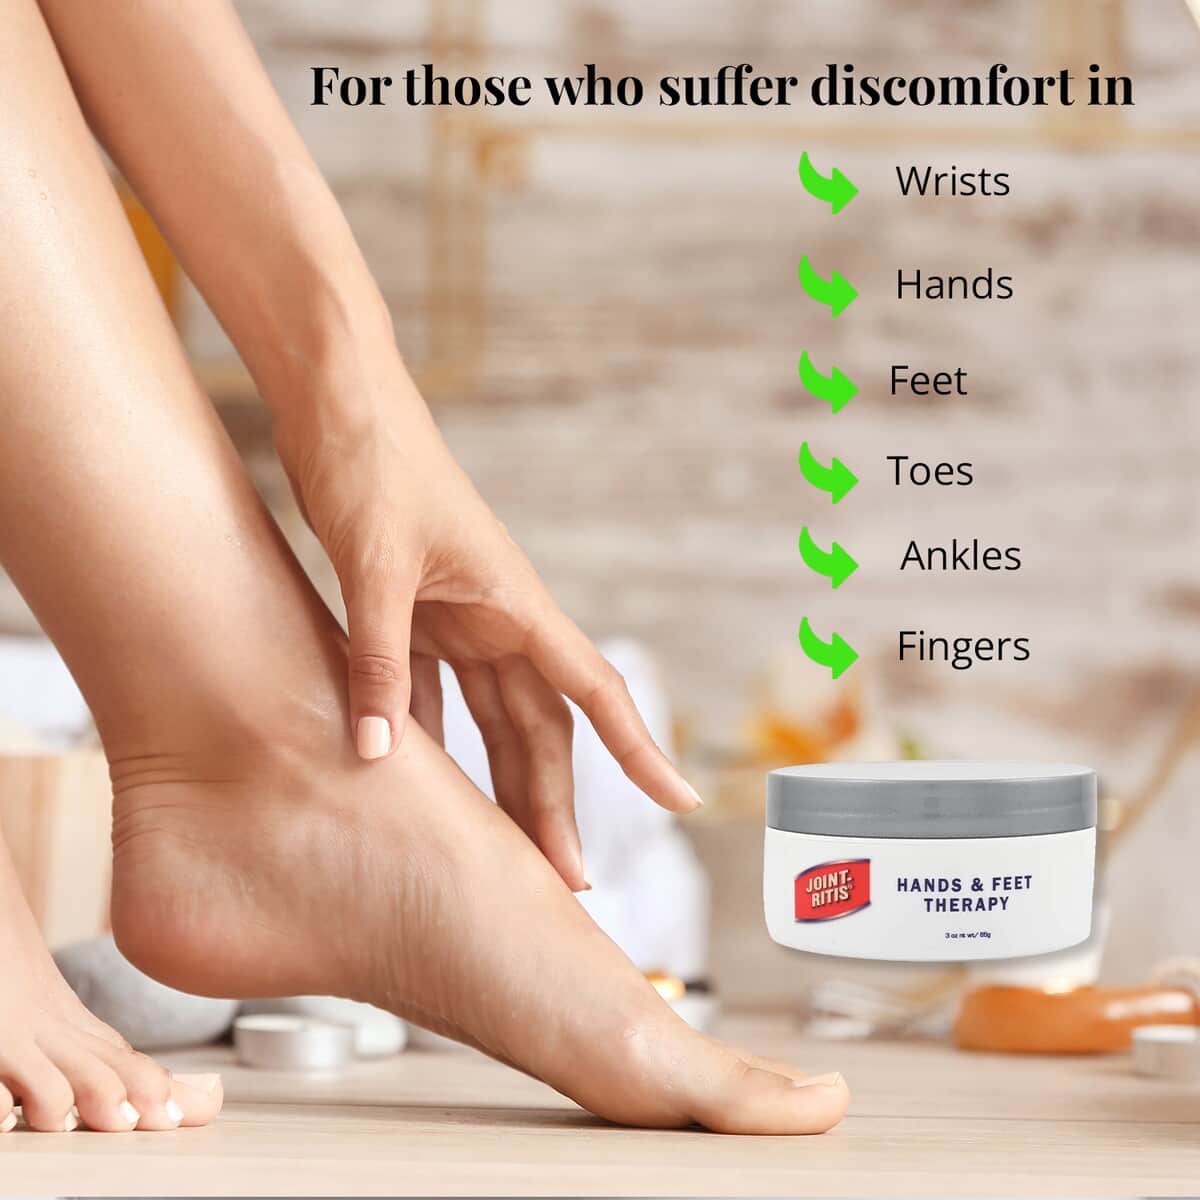 Joint-Ritis Hand & Feet Therapy Hand Foot Pain Reliever Cream For Muscle Pain, Paraben & Silicone Free Cream With Natural Ingredients (50ml) 3 oz image number 4